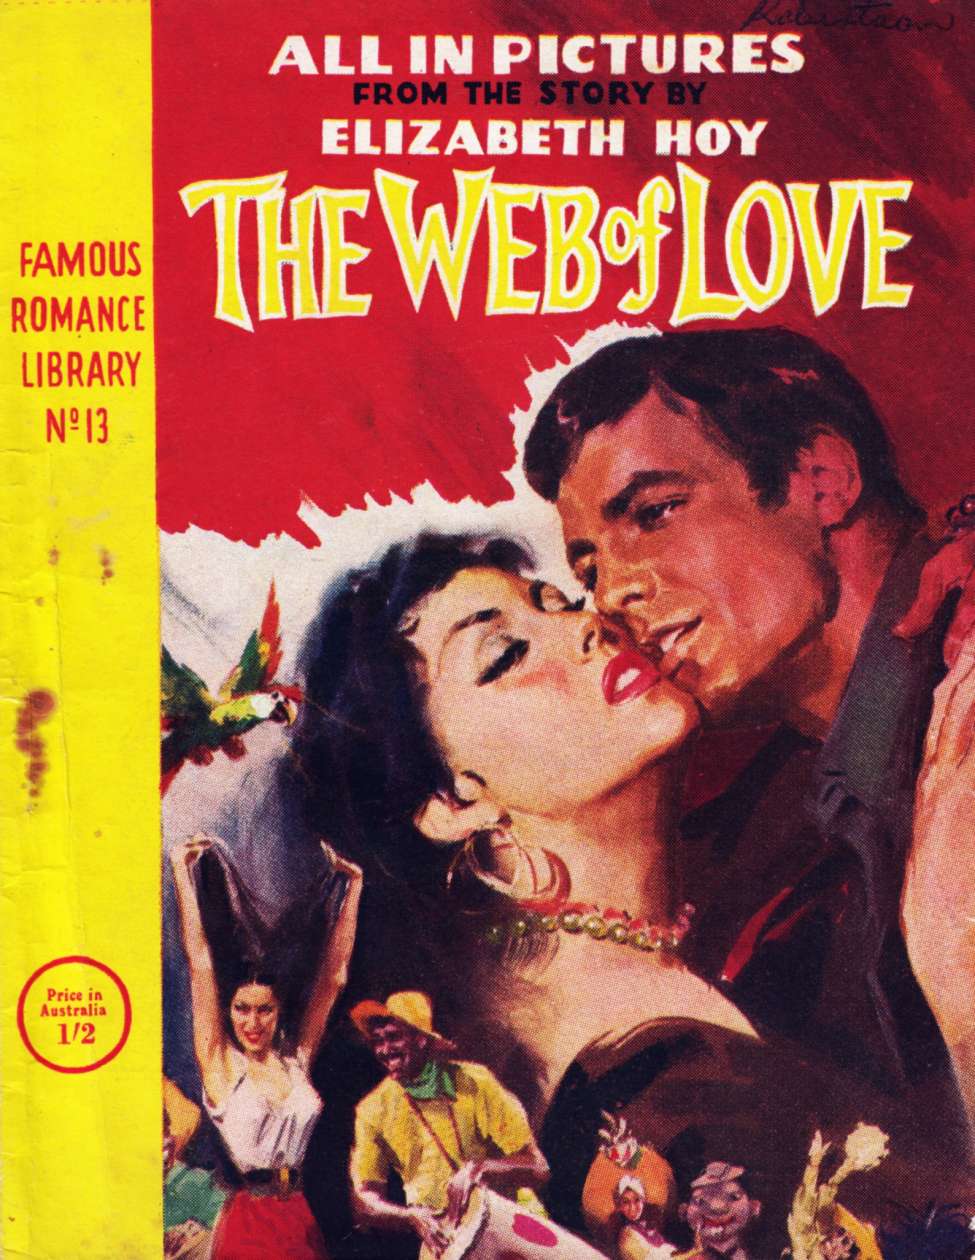 Book Cover For Famous Romance Library 13 - The Web of Love